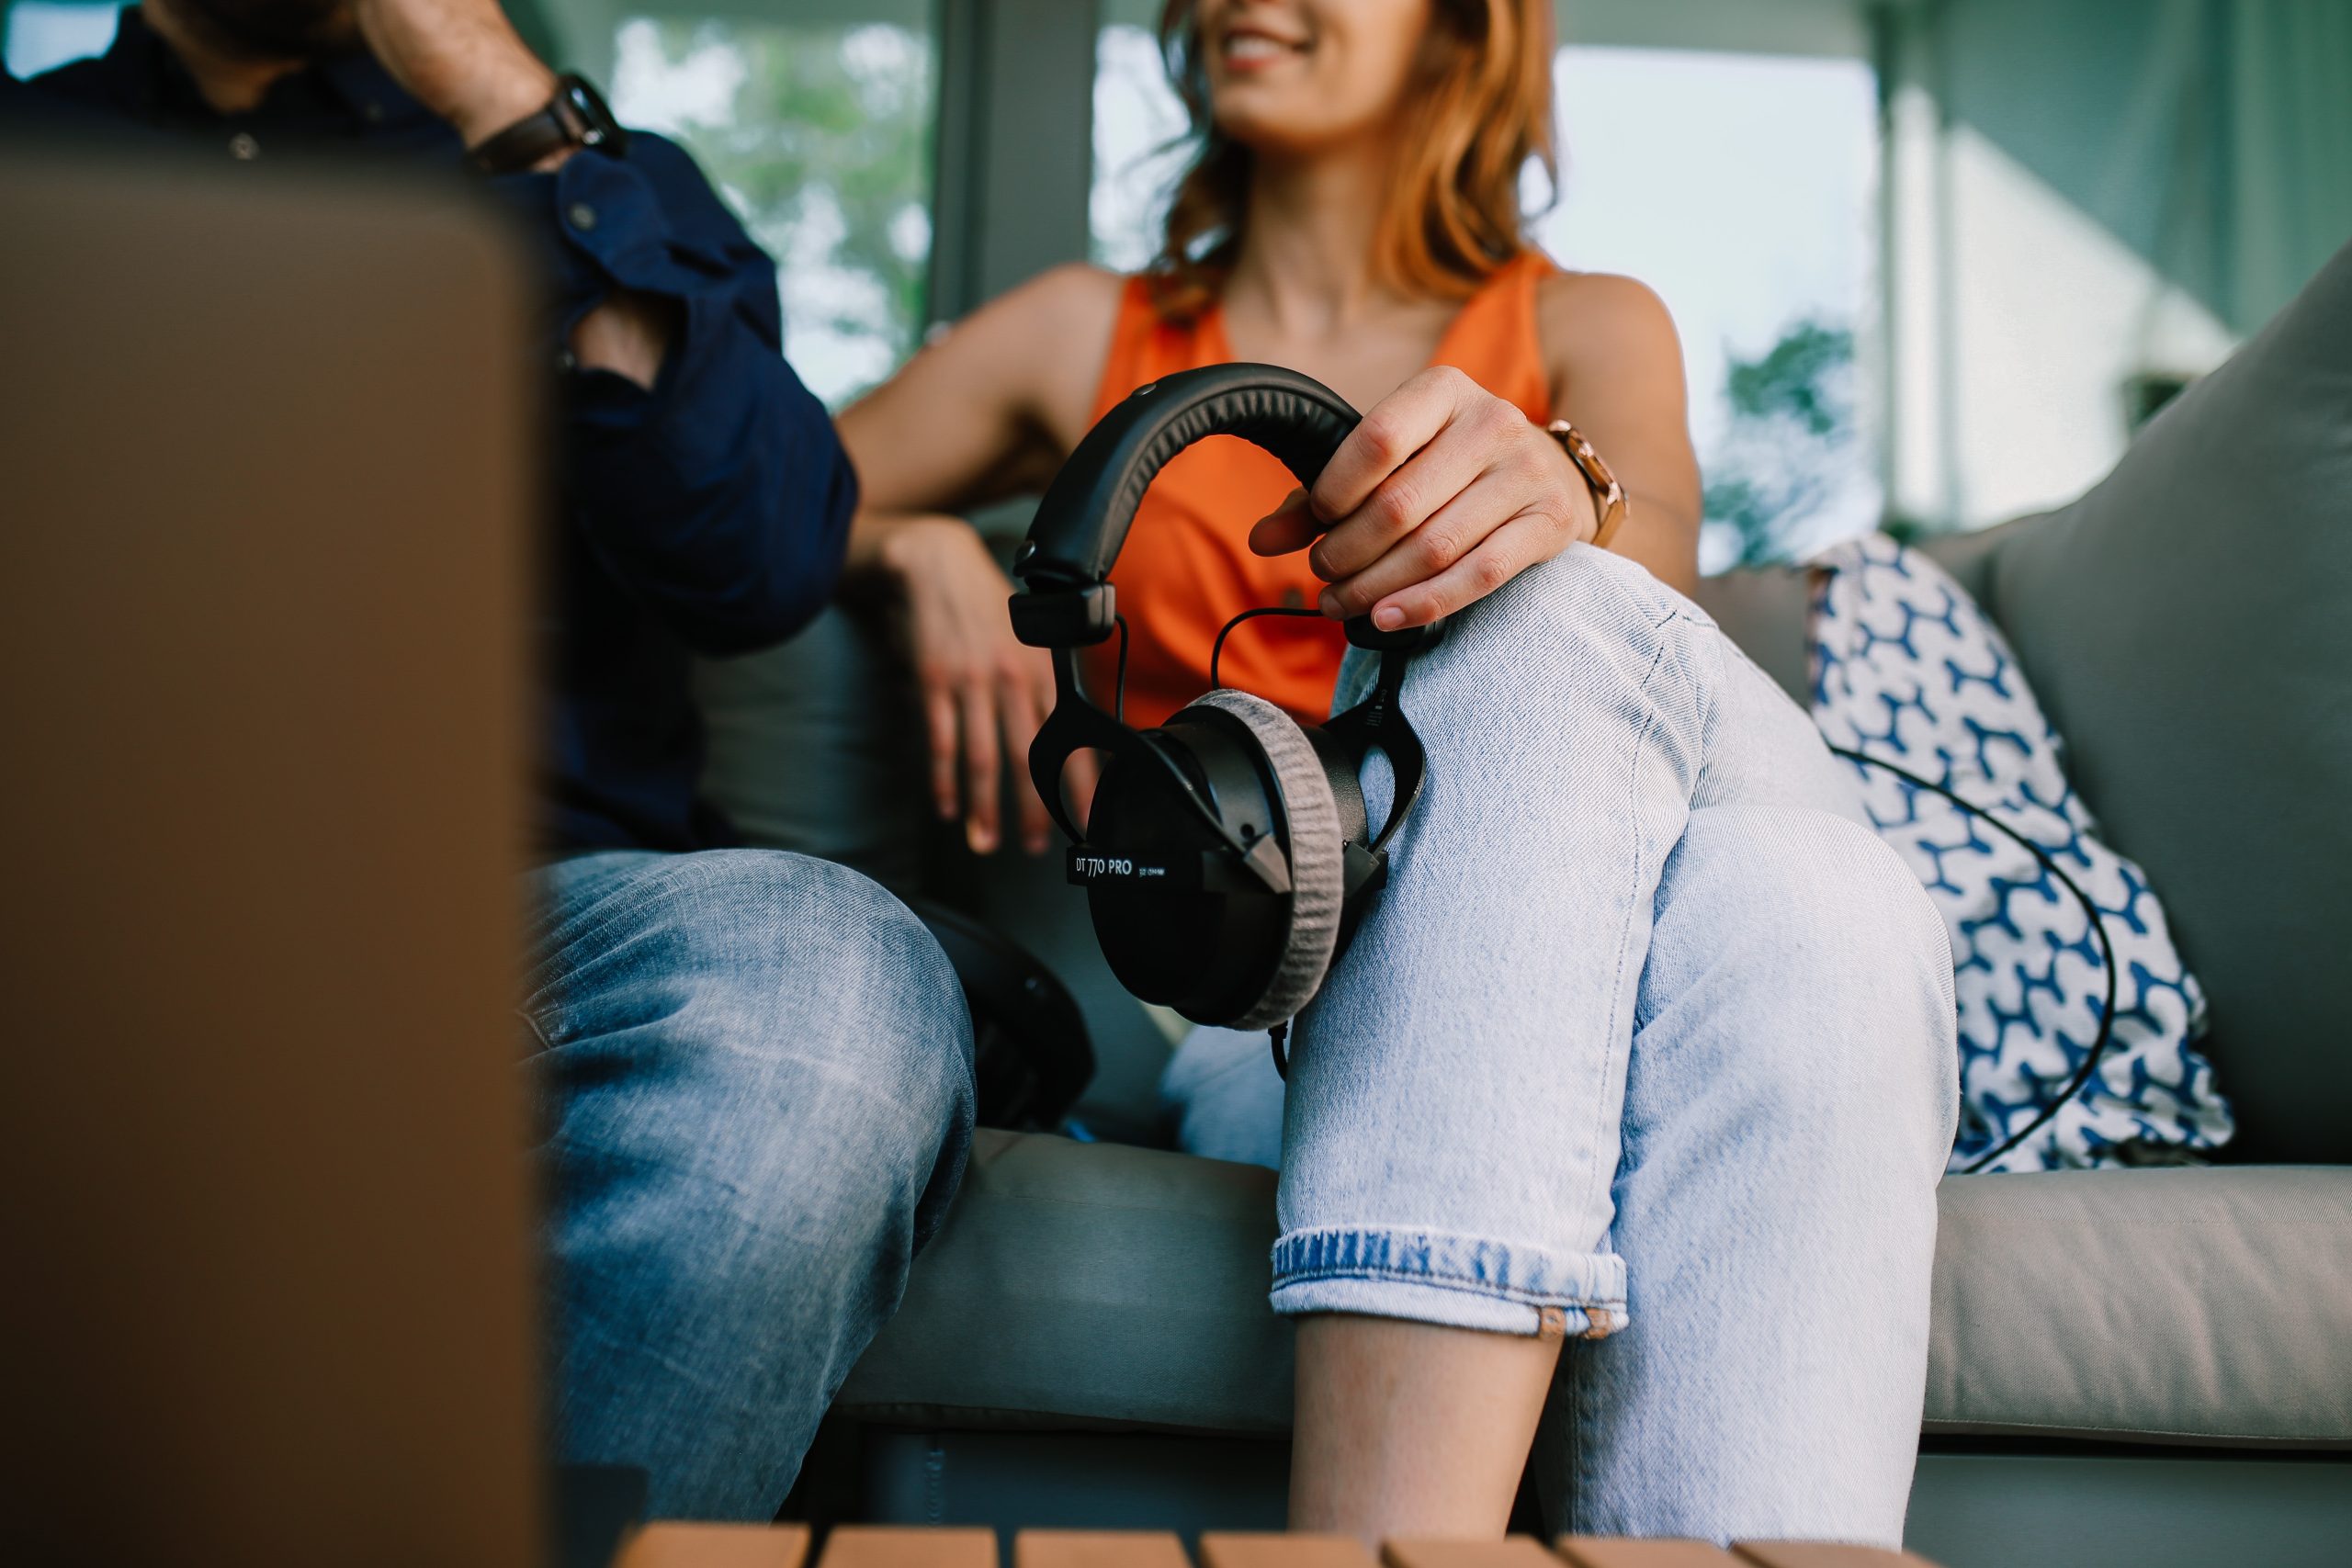 Two people sitting down. The woman is wearing an orange top, jeans and is holding a set of headphones.